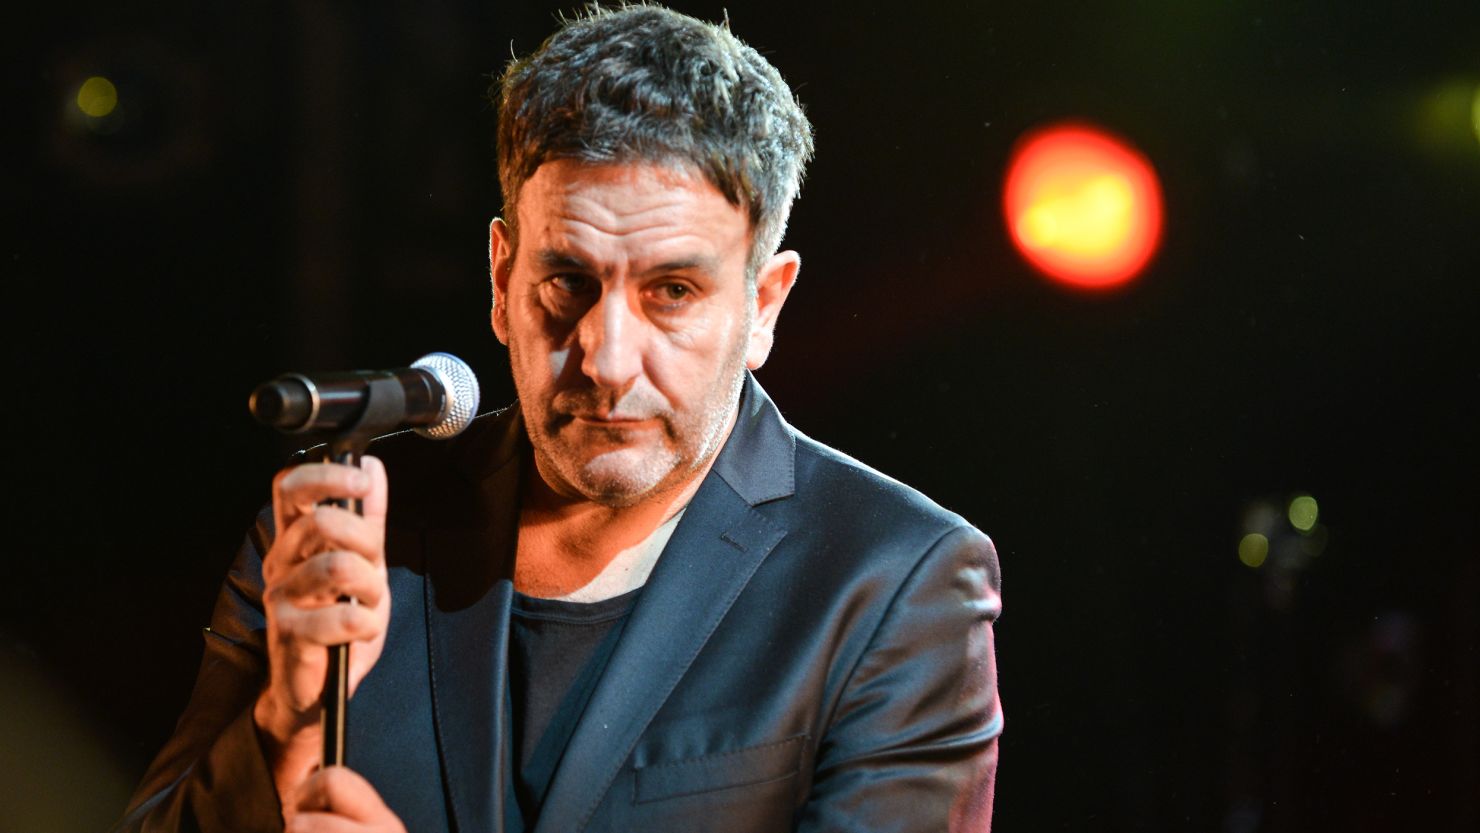 Terry Hall of the band The Specials, seen here at the SXSW 2013 Music Festival in Austin, Texas, has died.